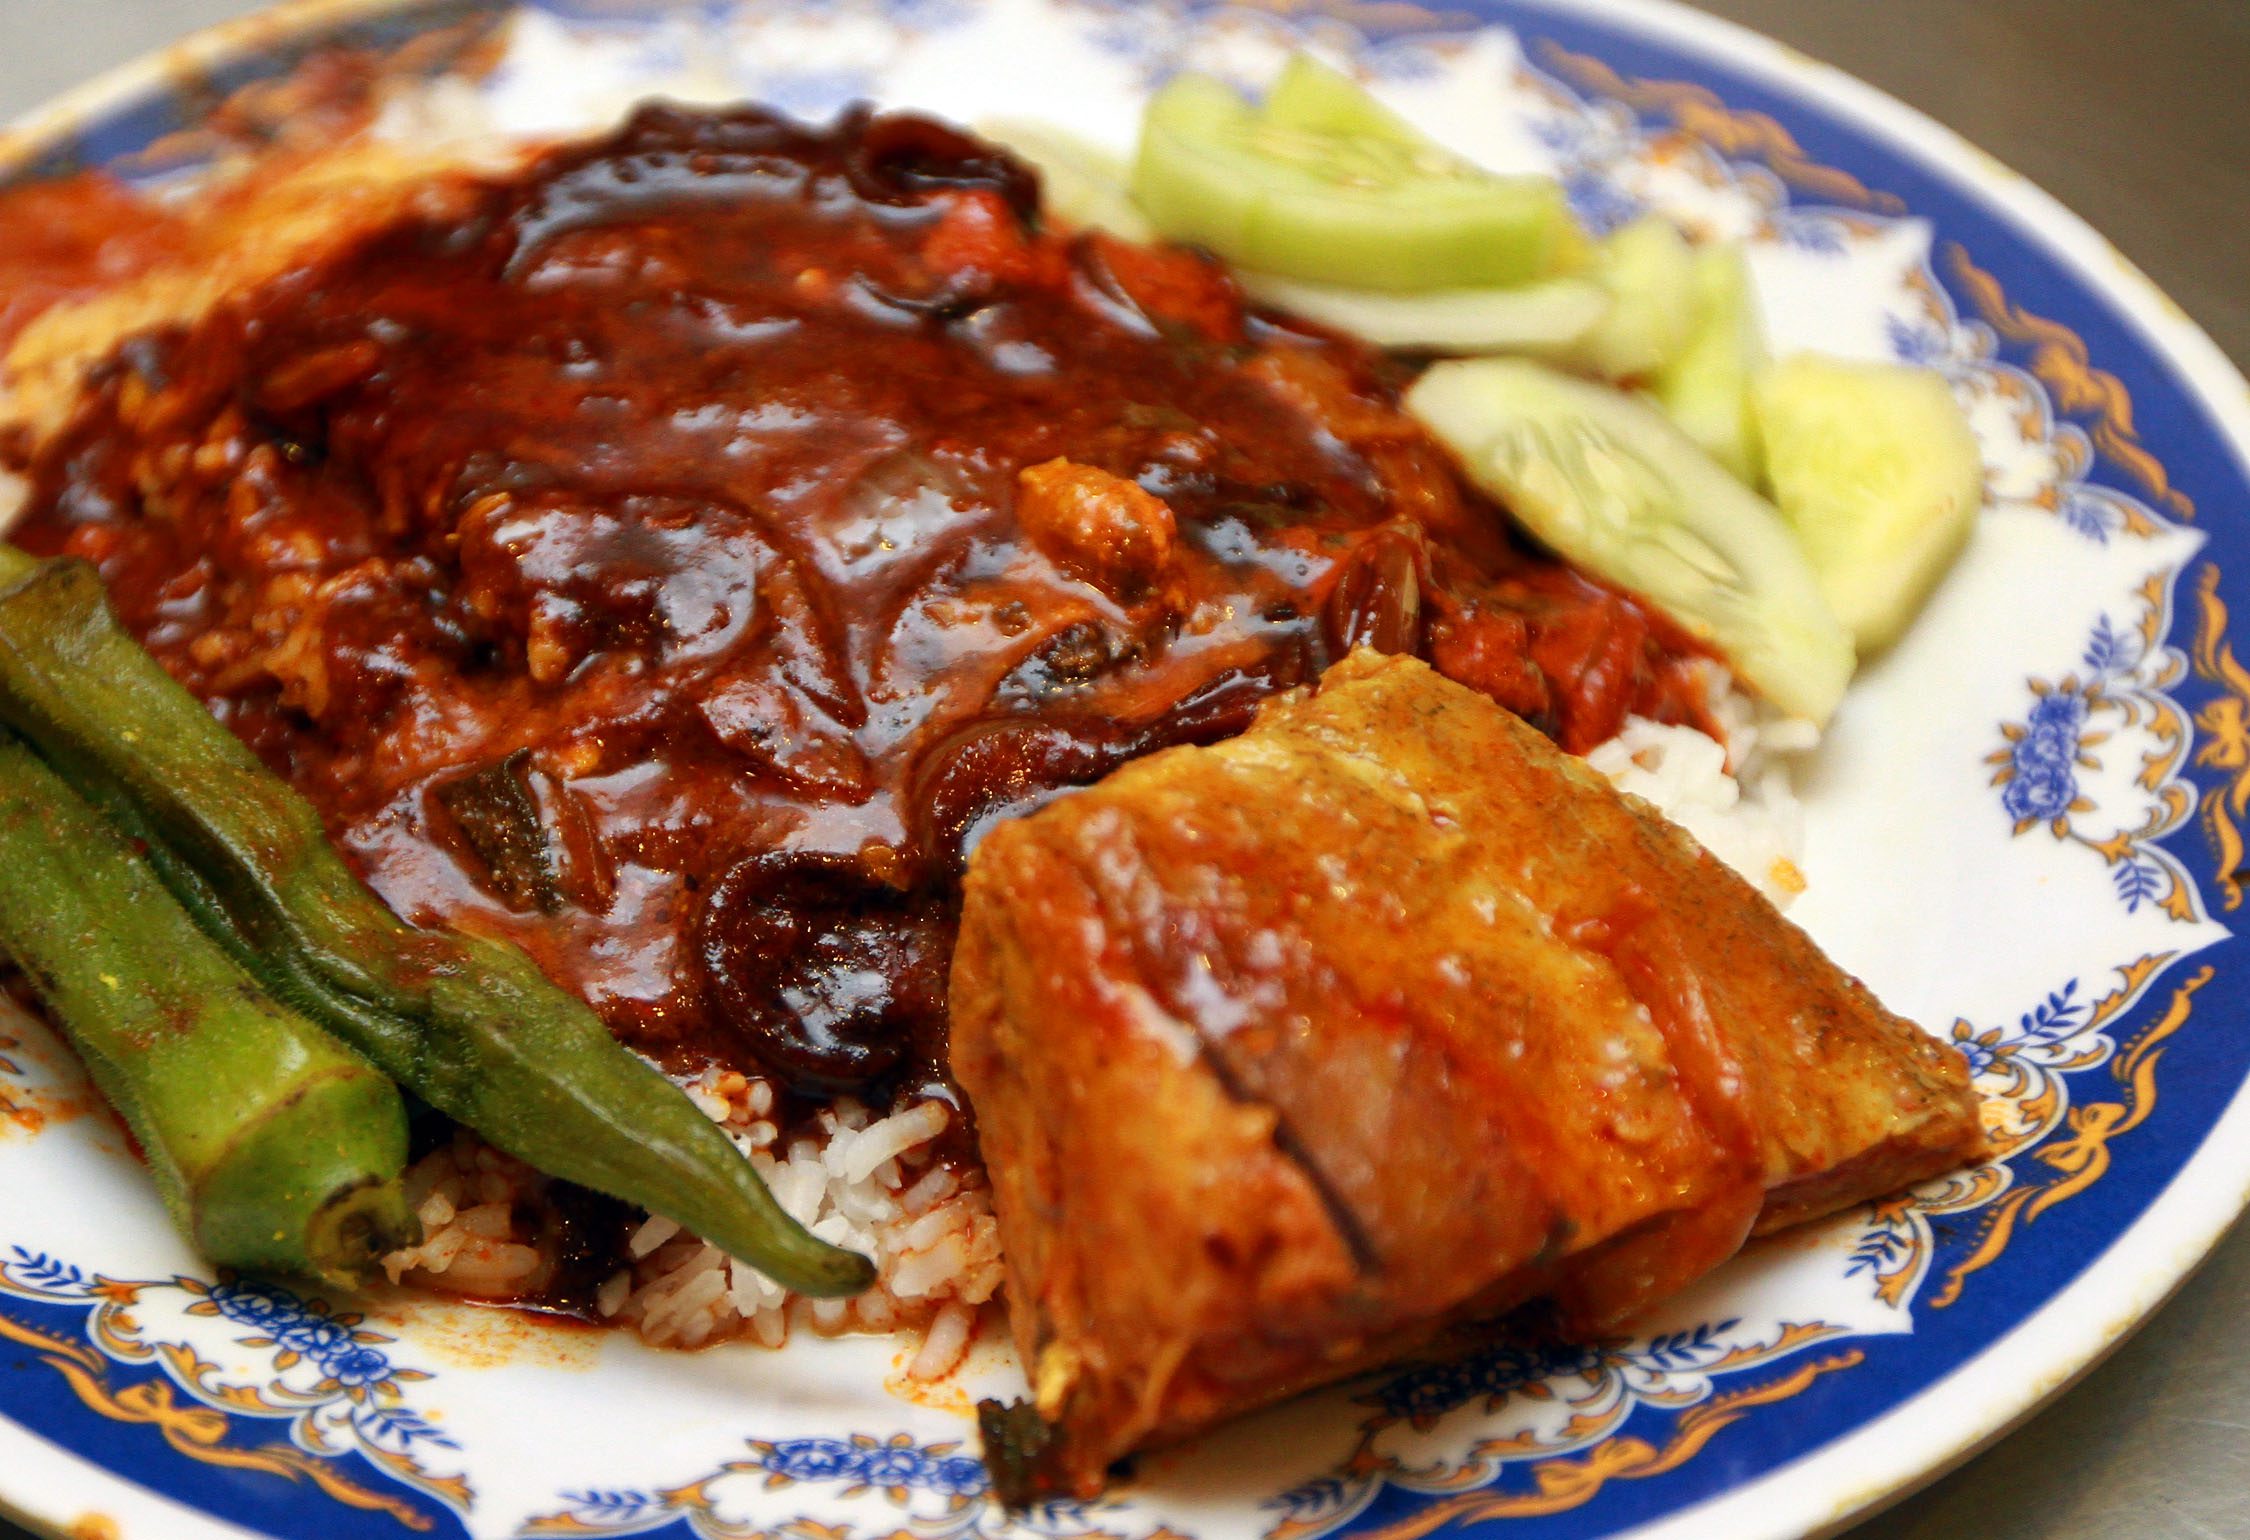 Nominate and vote for the best Nasi Kandar - Kuali